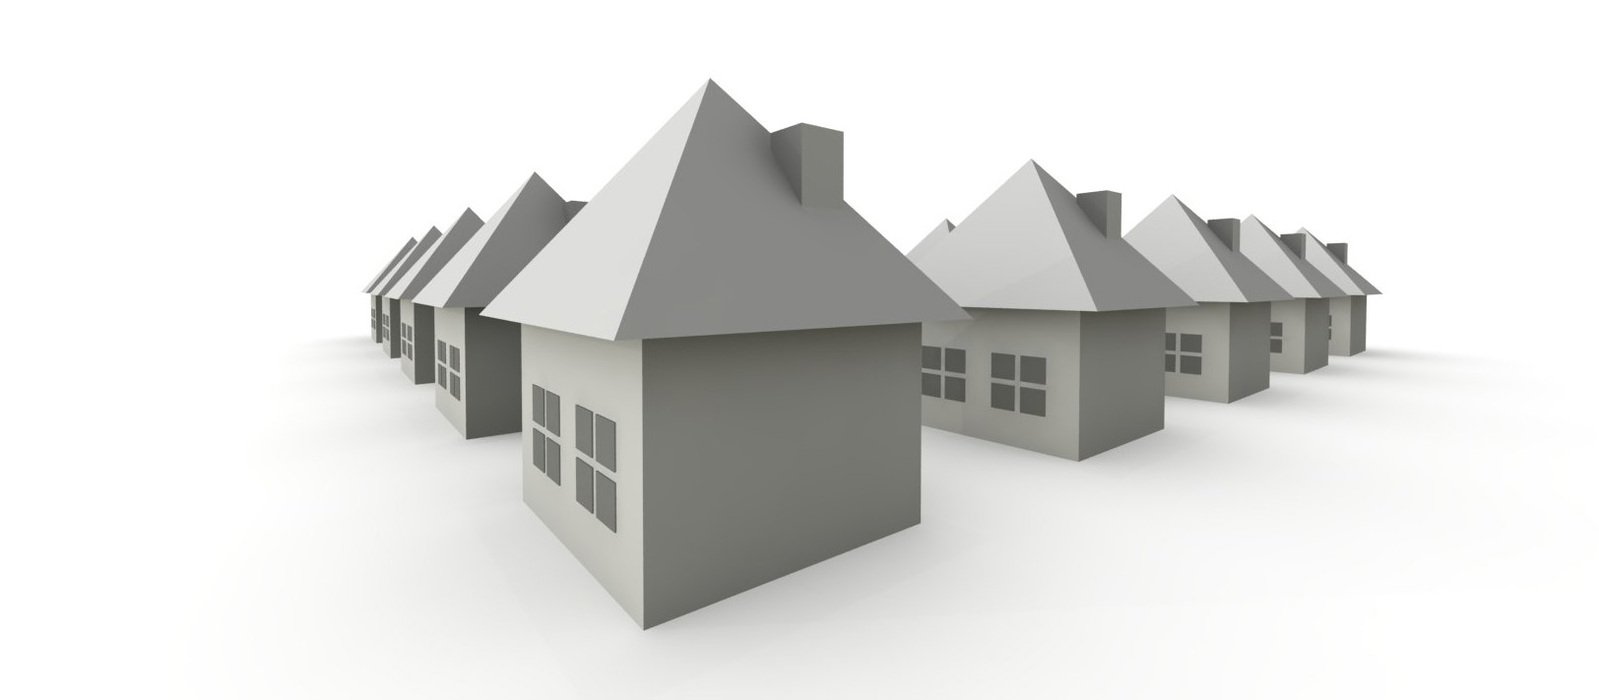 the 3d model houses in which we see